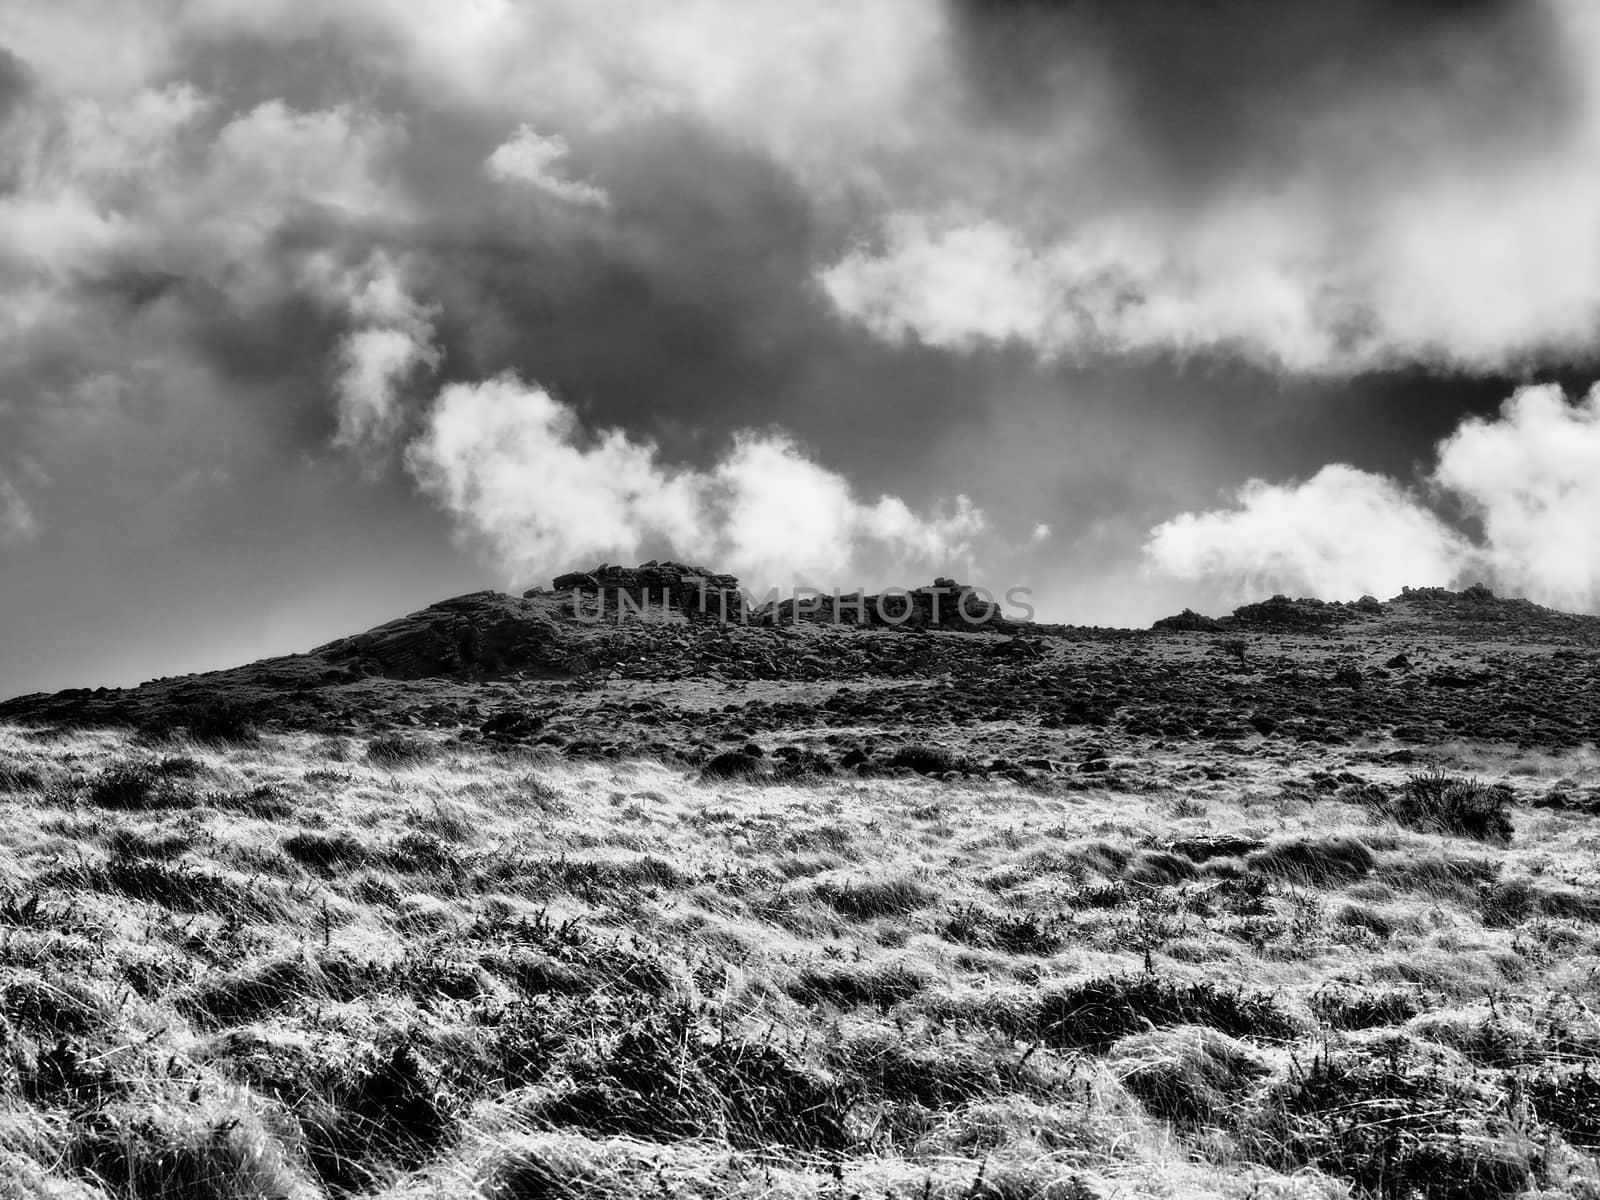 Monochrome image of rugged rocky outcrop tor on moorland hill with dark clouds rolling over, Dartmoor National Park, Devon, UK